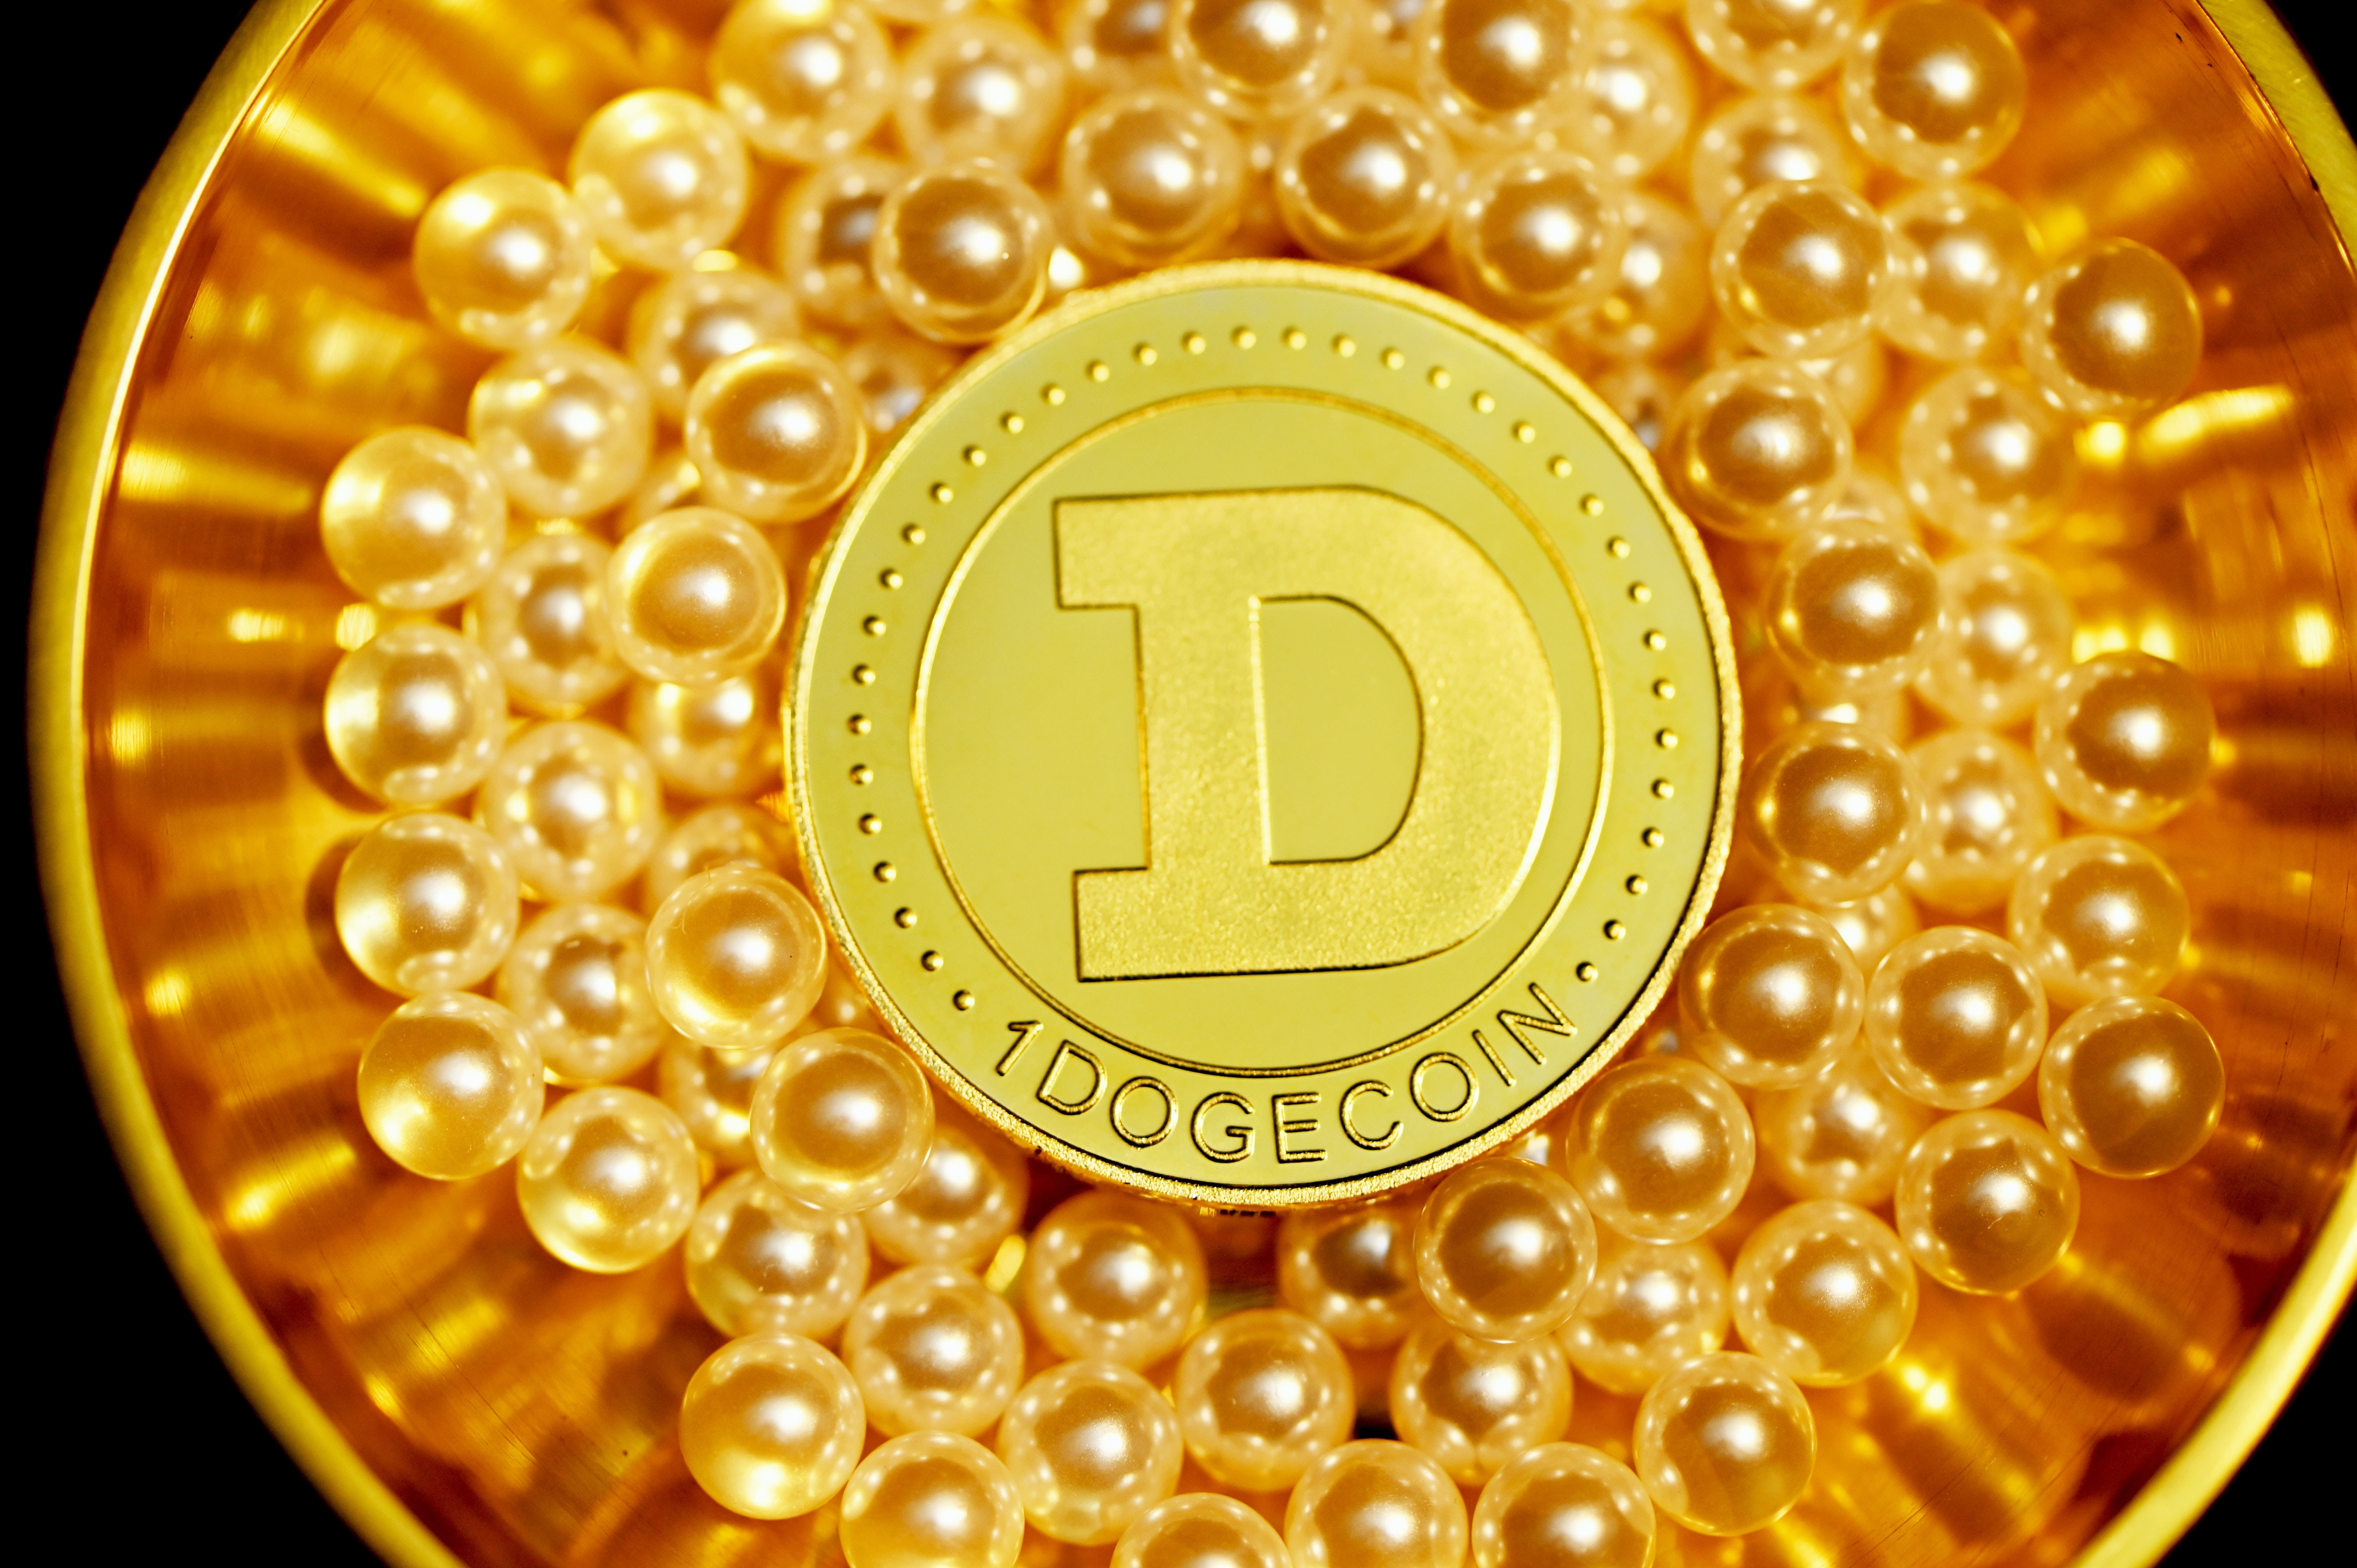 Dogecoin Set To Release New Version Of Blockchain Tool Libdogecoin: What Investors Need To Know